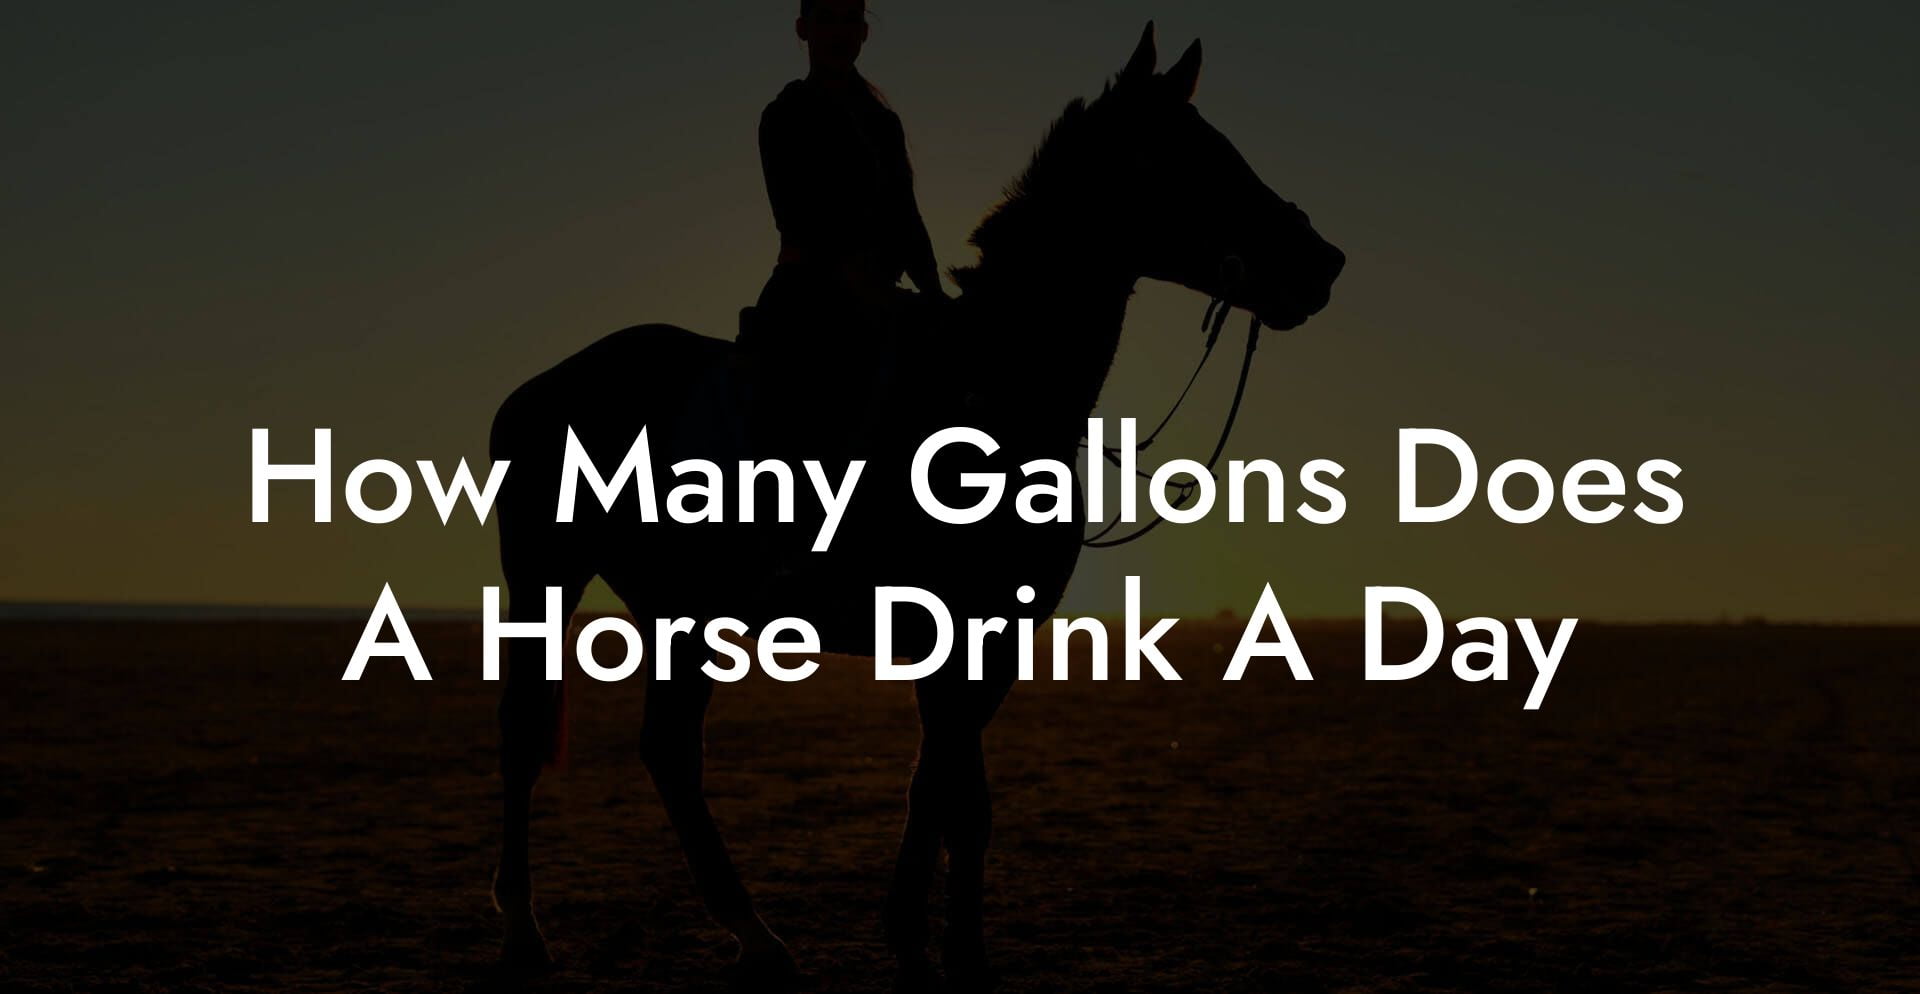 How Many Gallons Does A Horse Drink A Day